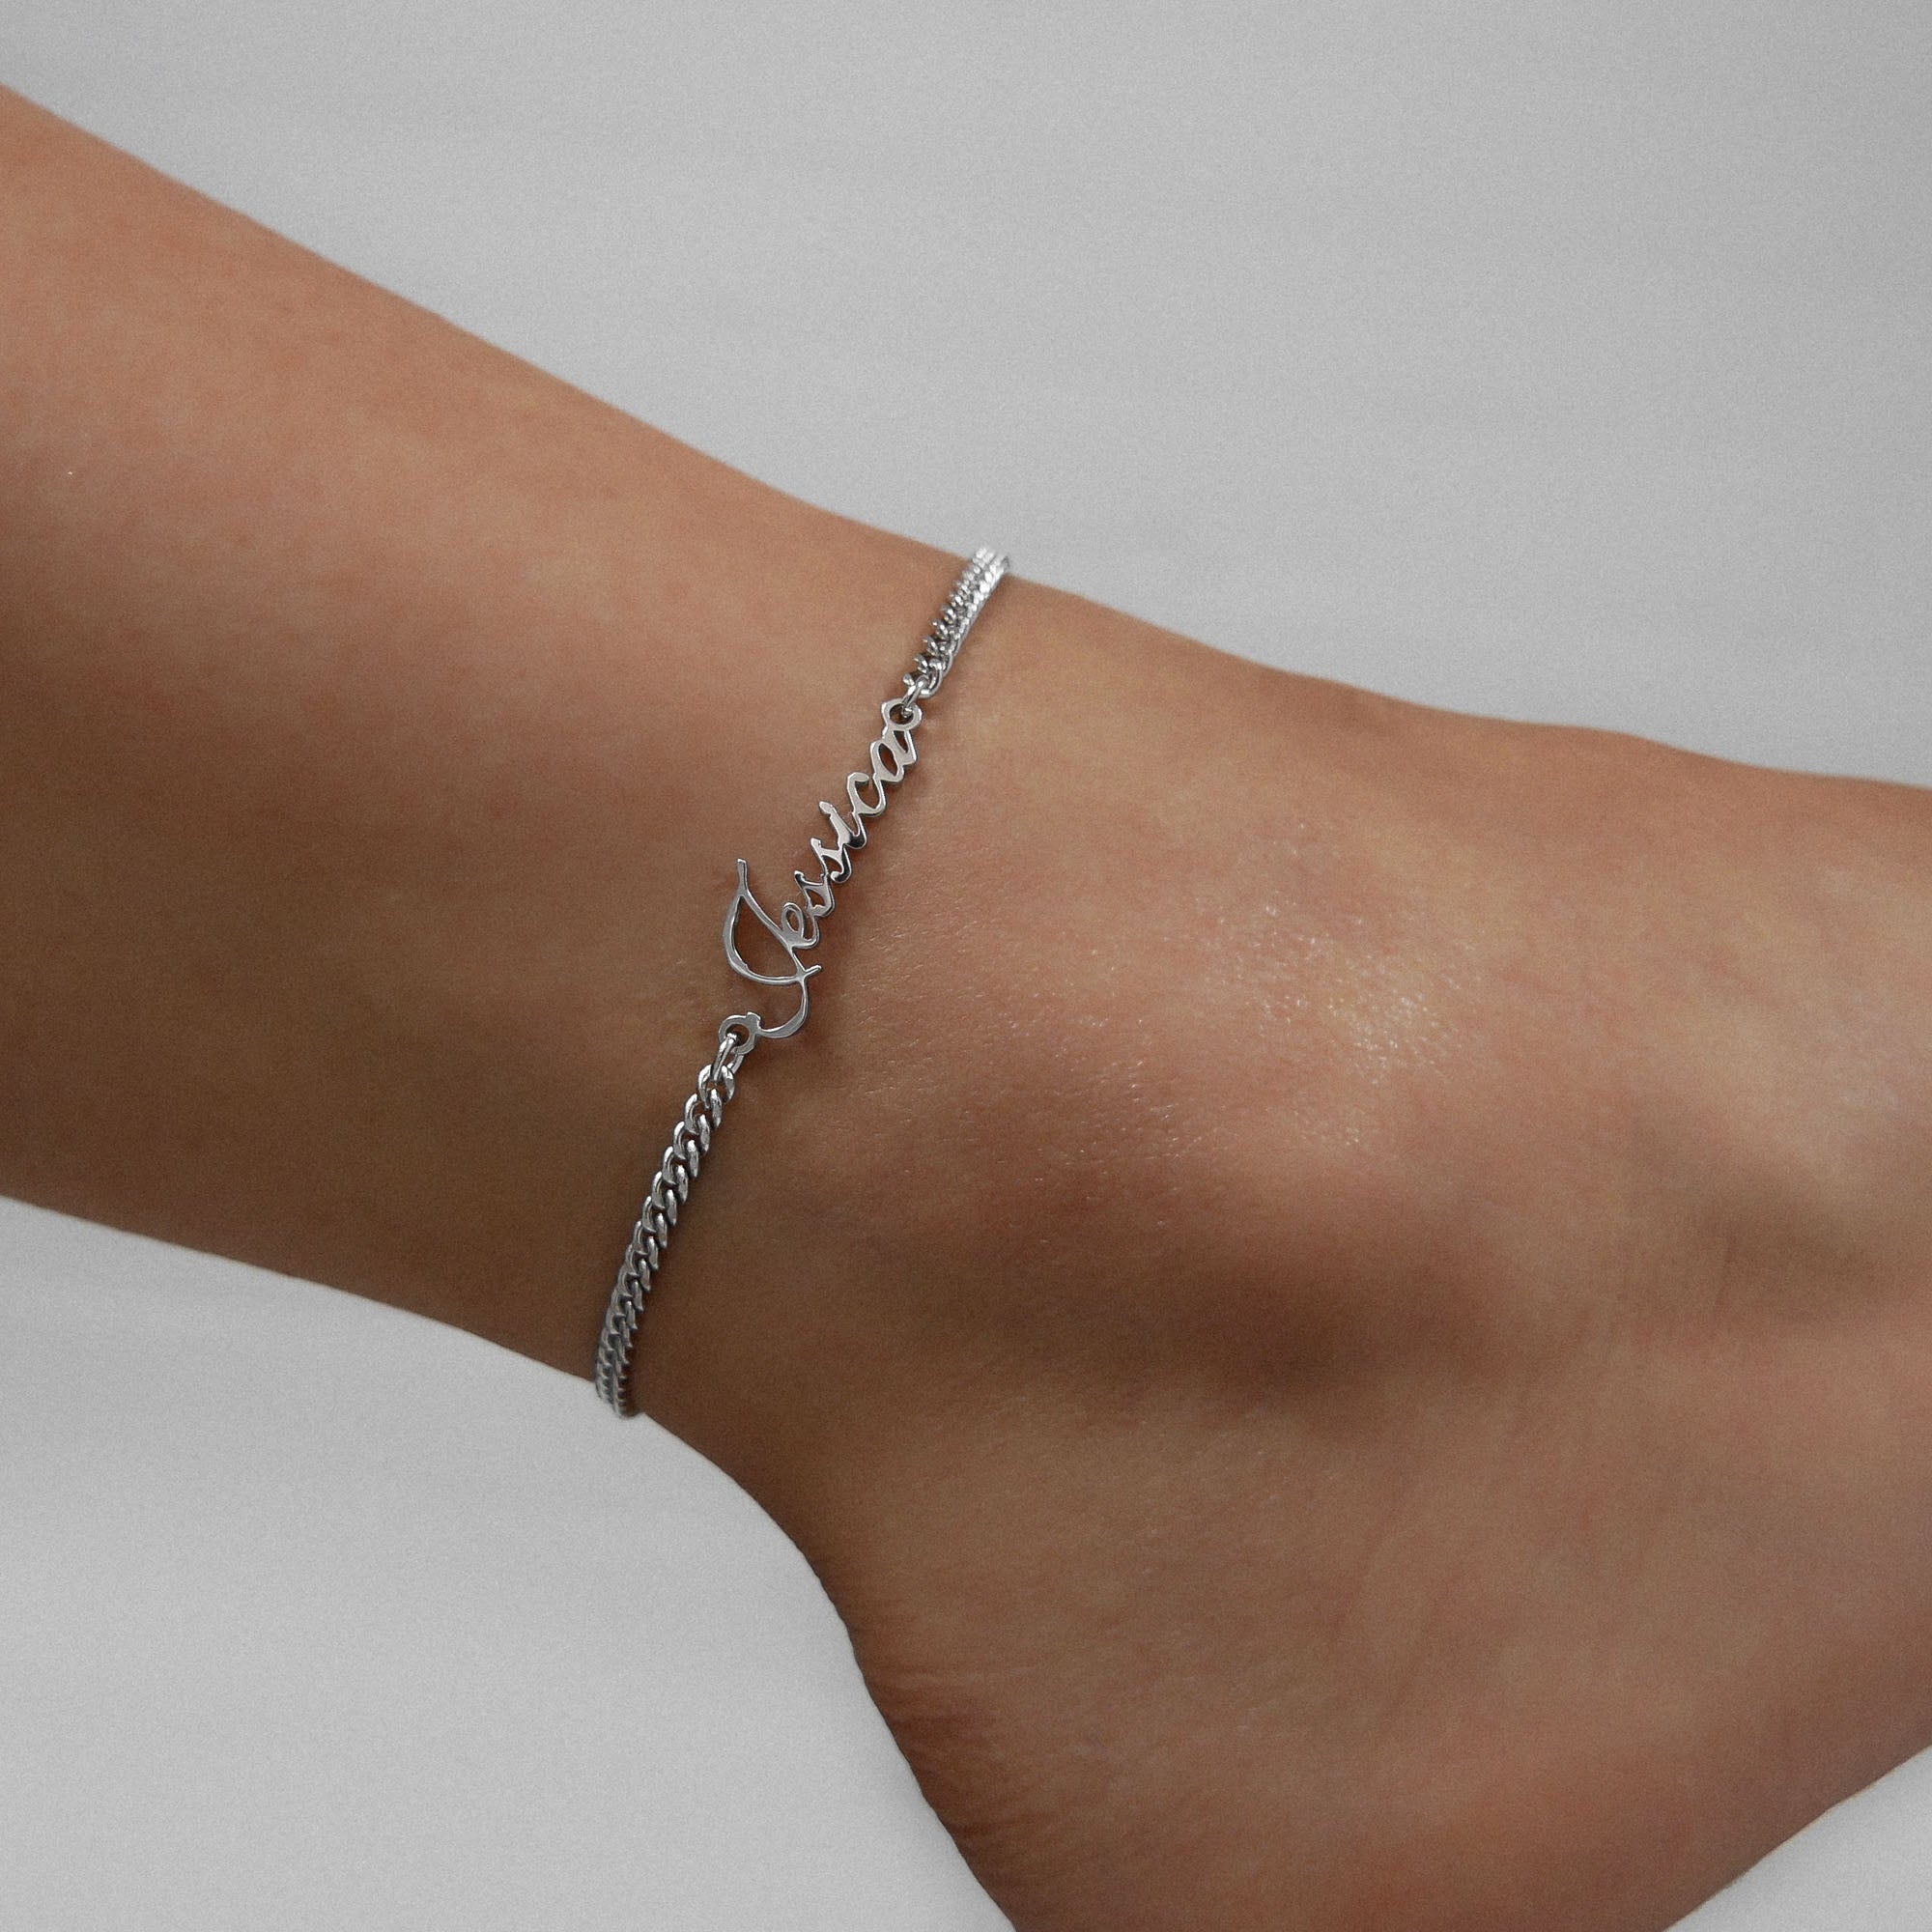 Silver name anklet worn on woman’s ankle 